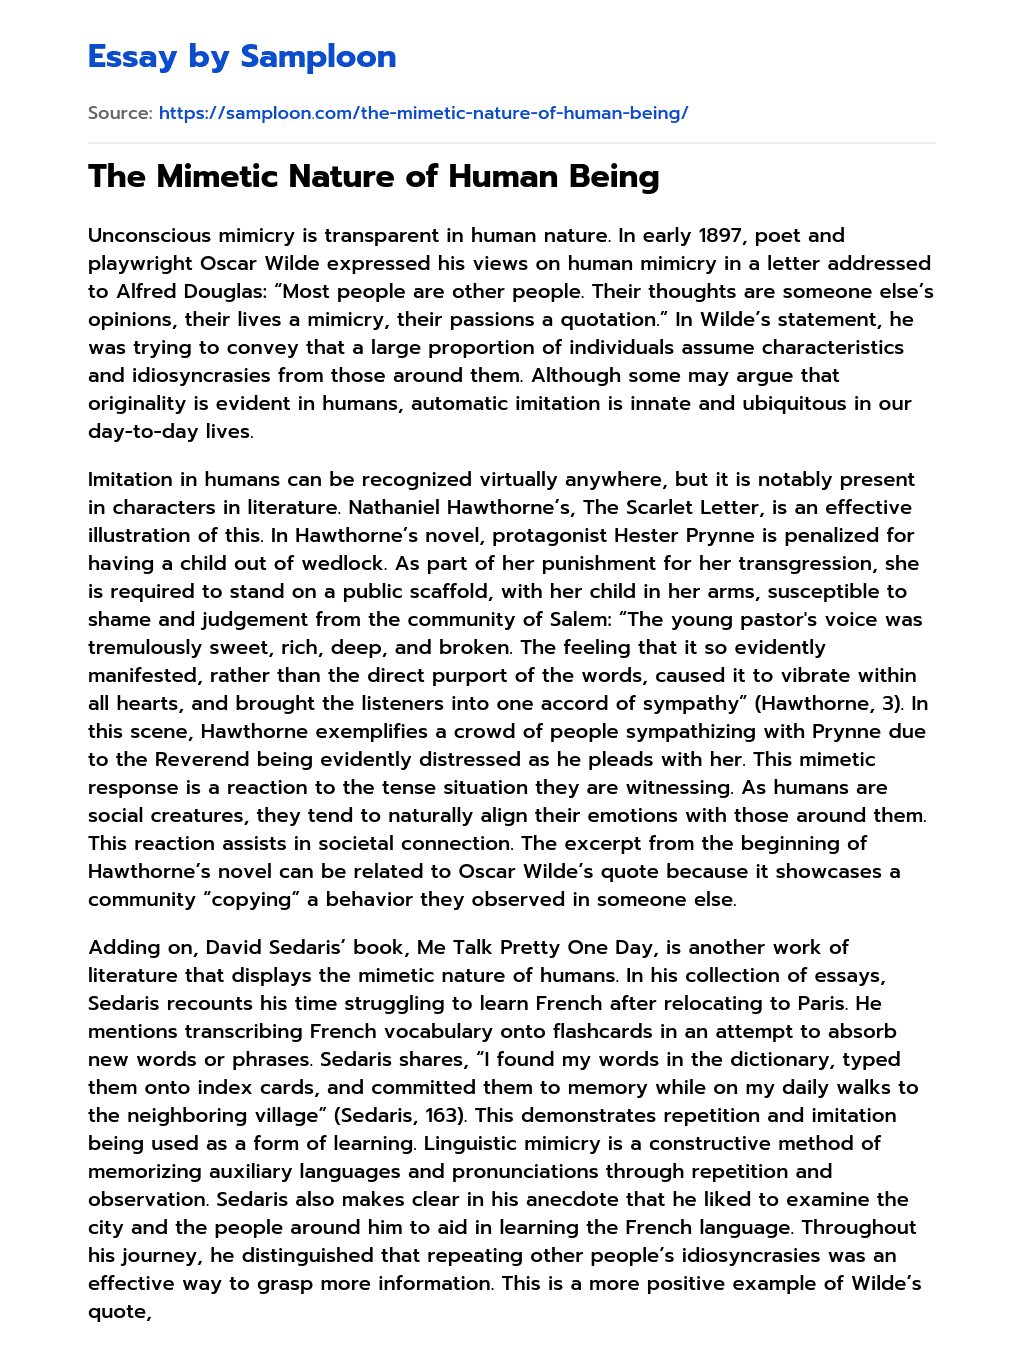 The Mimetic Nature of Human Being essay